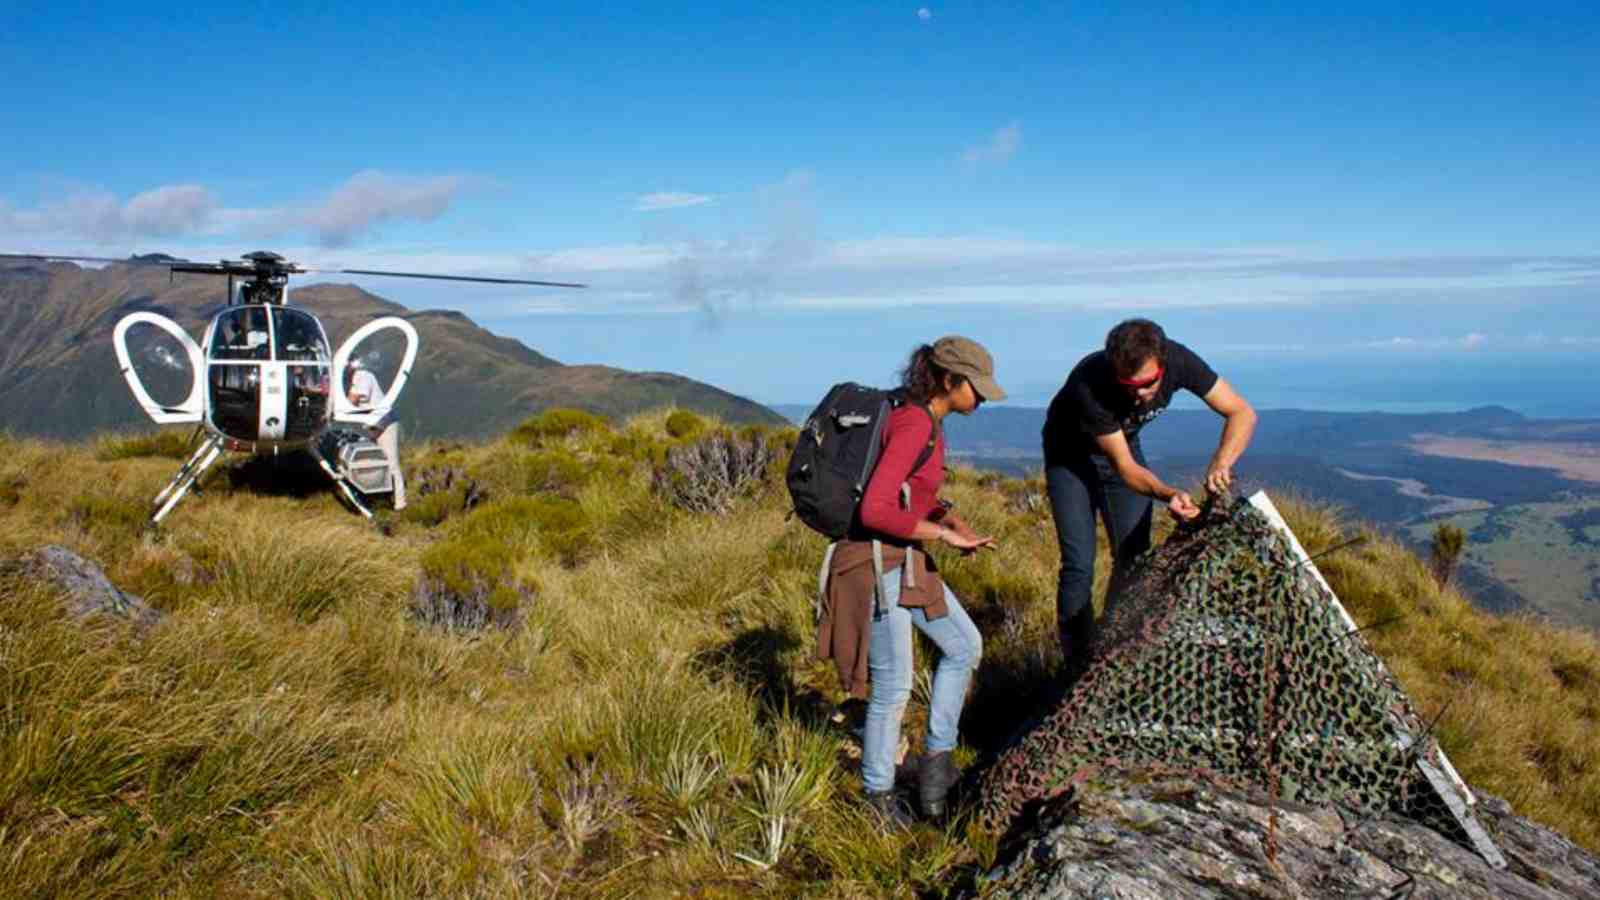 Dr Calum Chamberlain and PhD student Laura-May Baratin from Victoria University of Wellington look at monitoring equipment on Mt Baird in the Southern Alps. There are hills in the back and a helicopter near them. Photo: Dr Emily Warren-Smith.